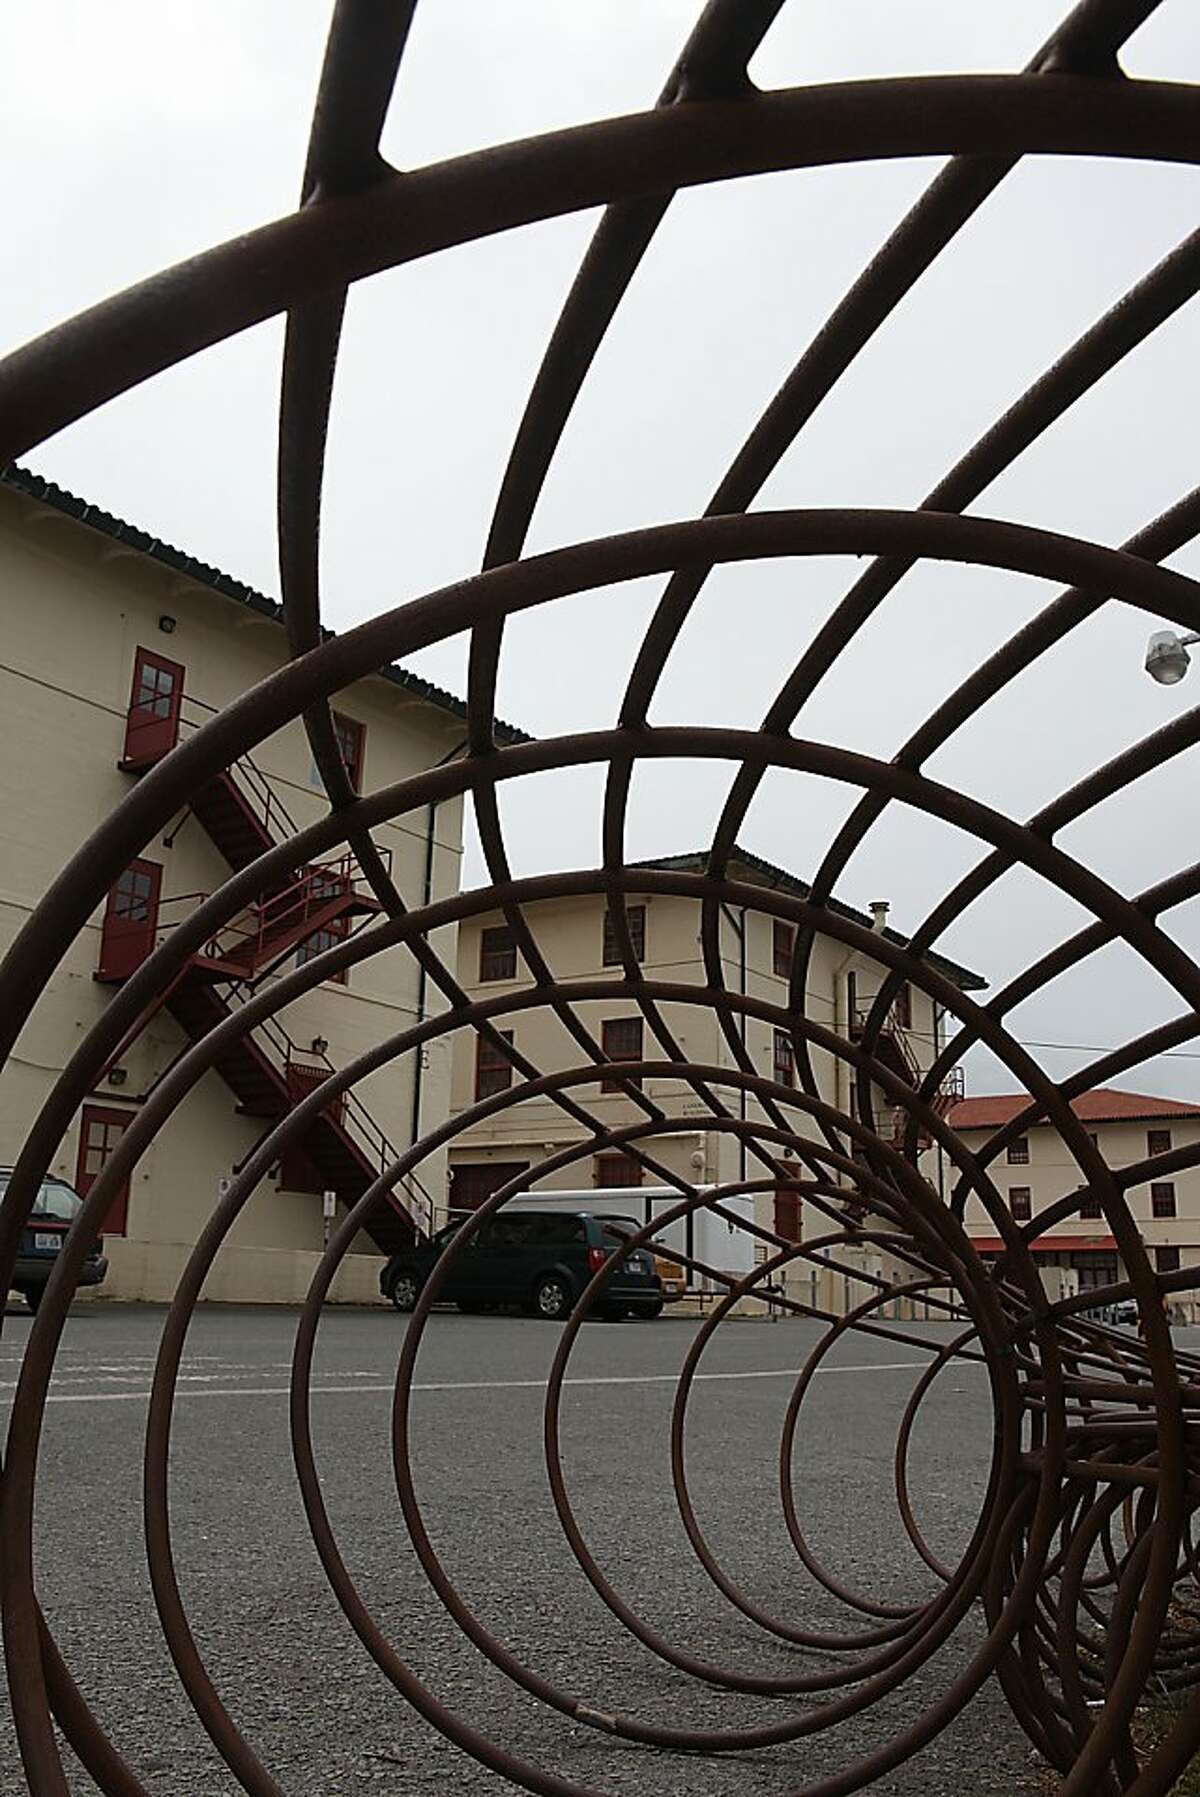 Fort Mason building centers seen through a seat sculpture by artist Jefferson Mack at Fort Mason center in San Francisco, Calif., on Wednesday, May 2, 2012.